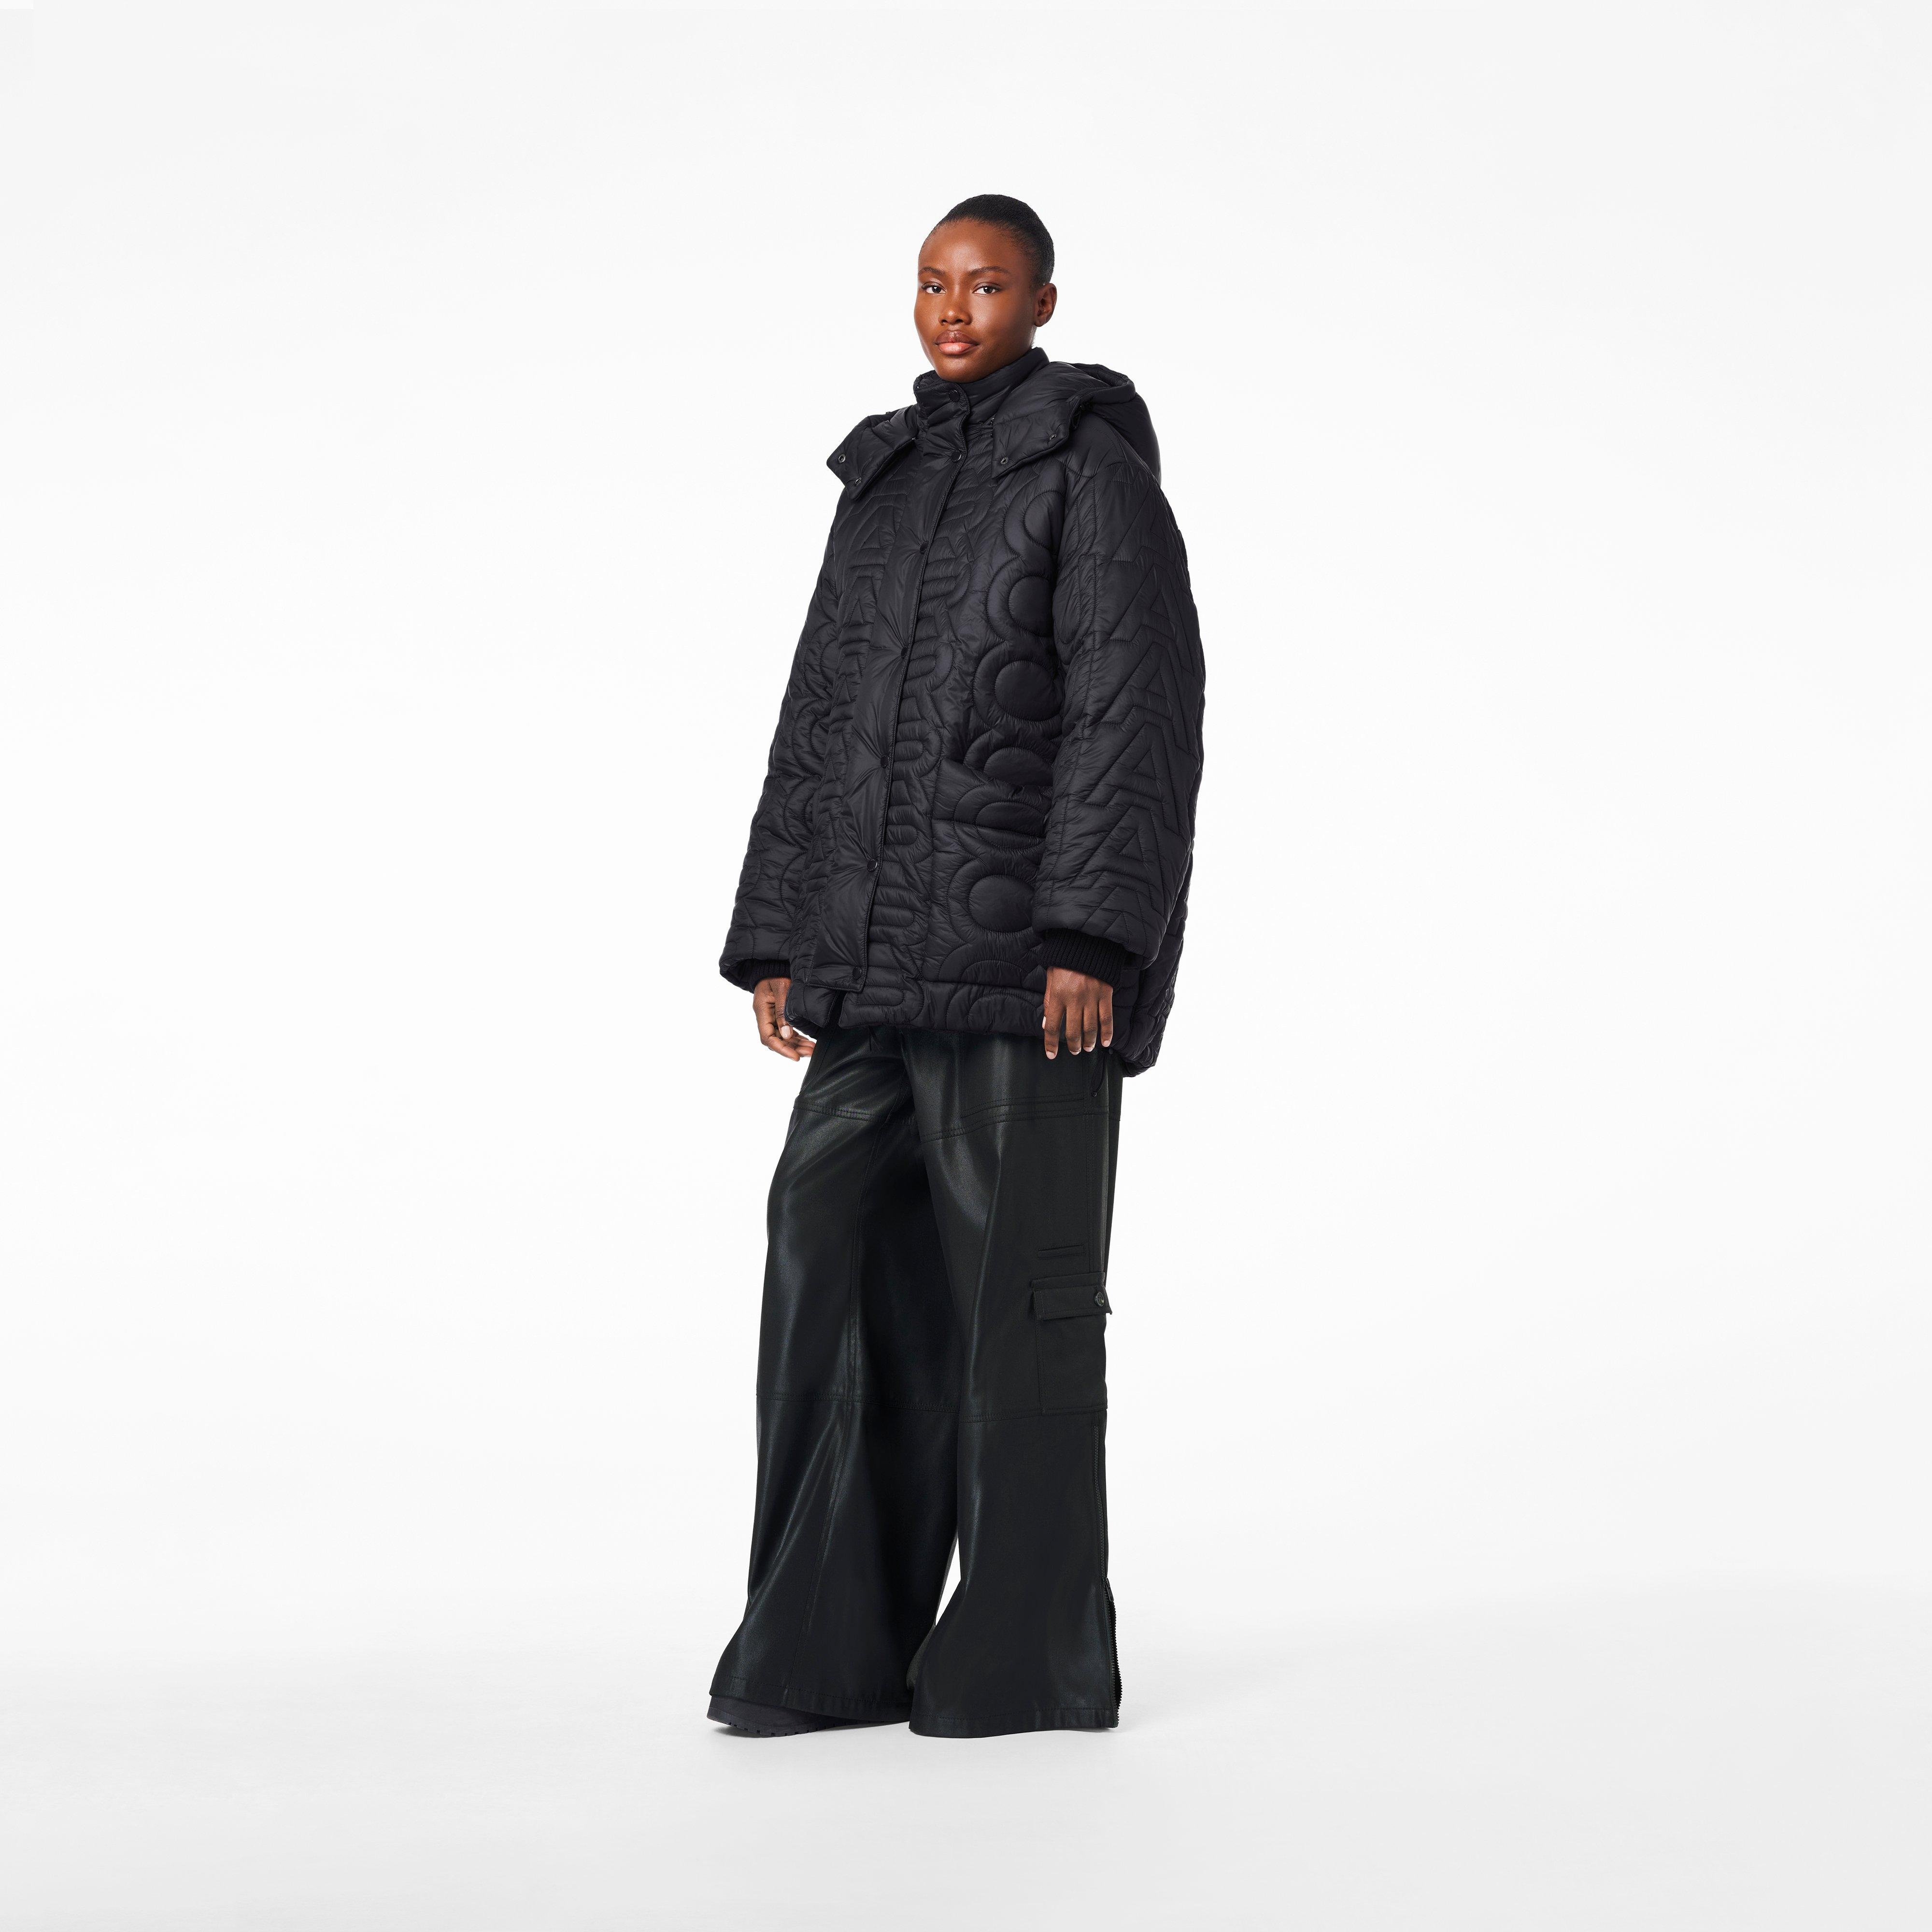 THE MONOGRAM QUILTED PUFFER JACKET - 6